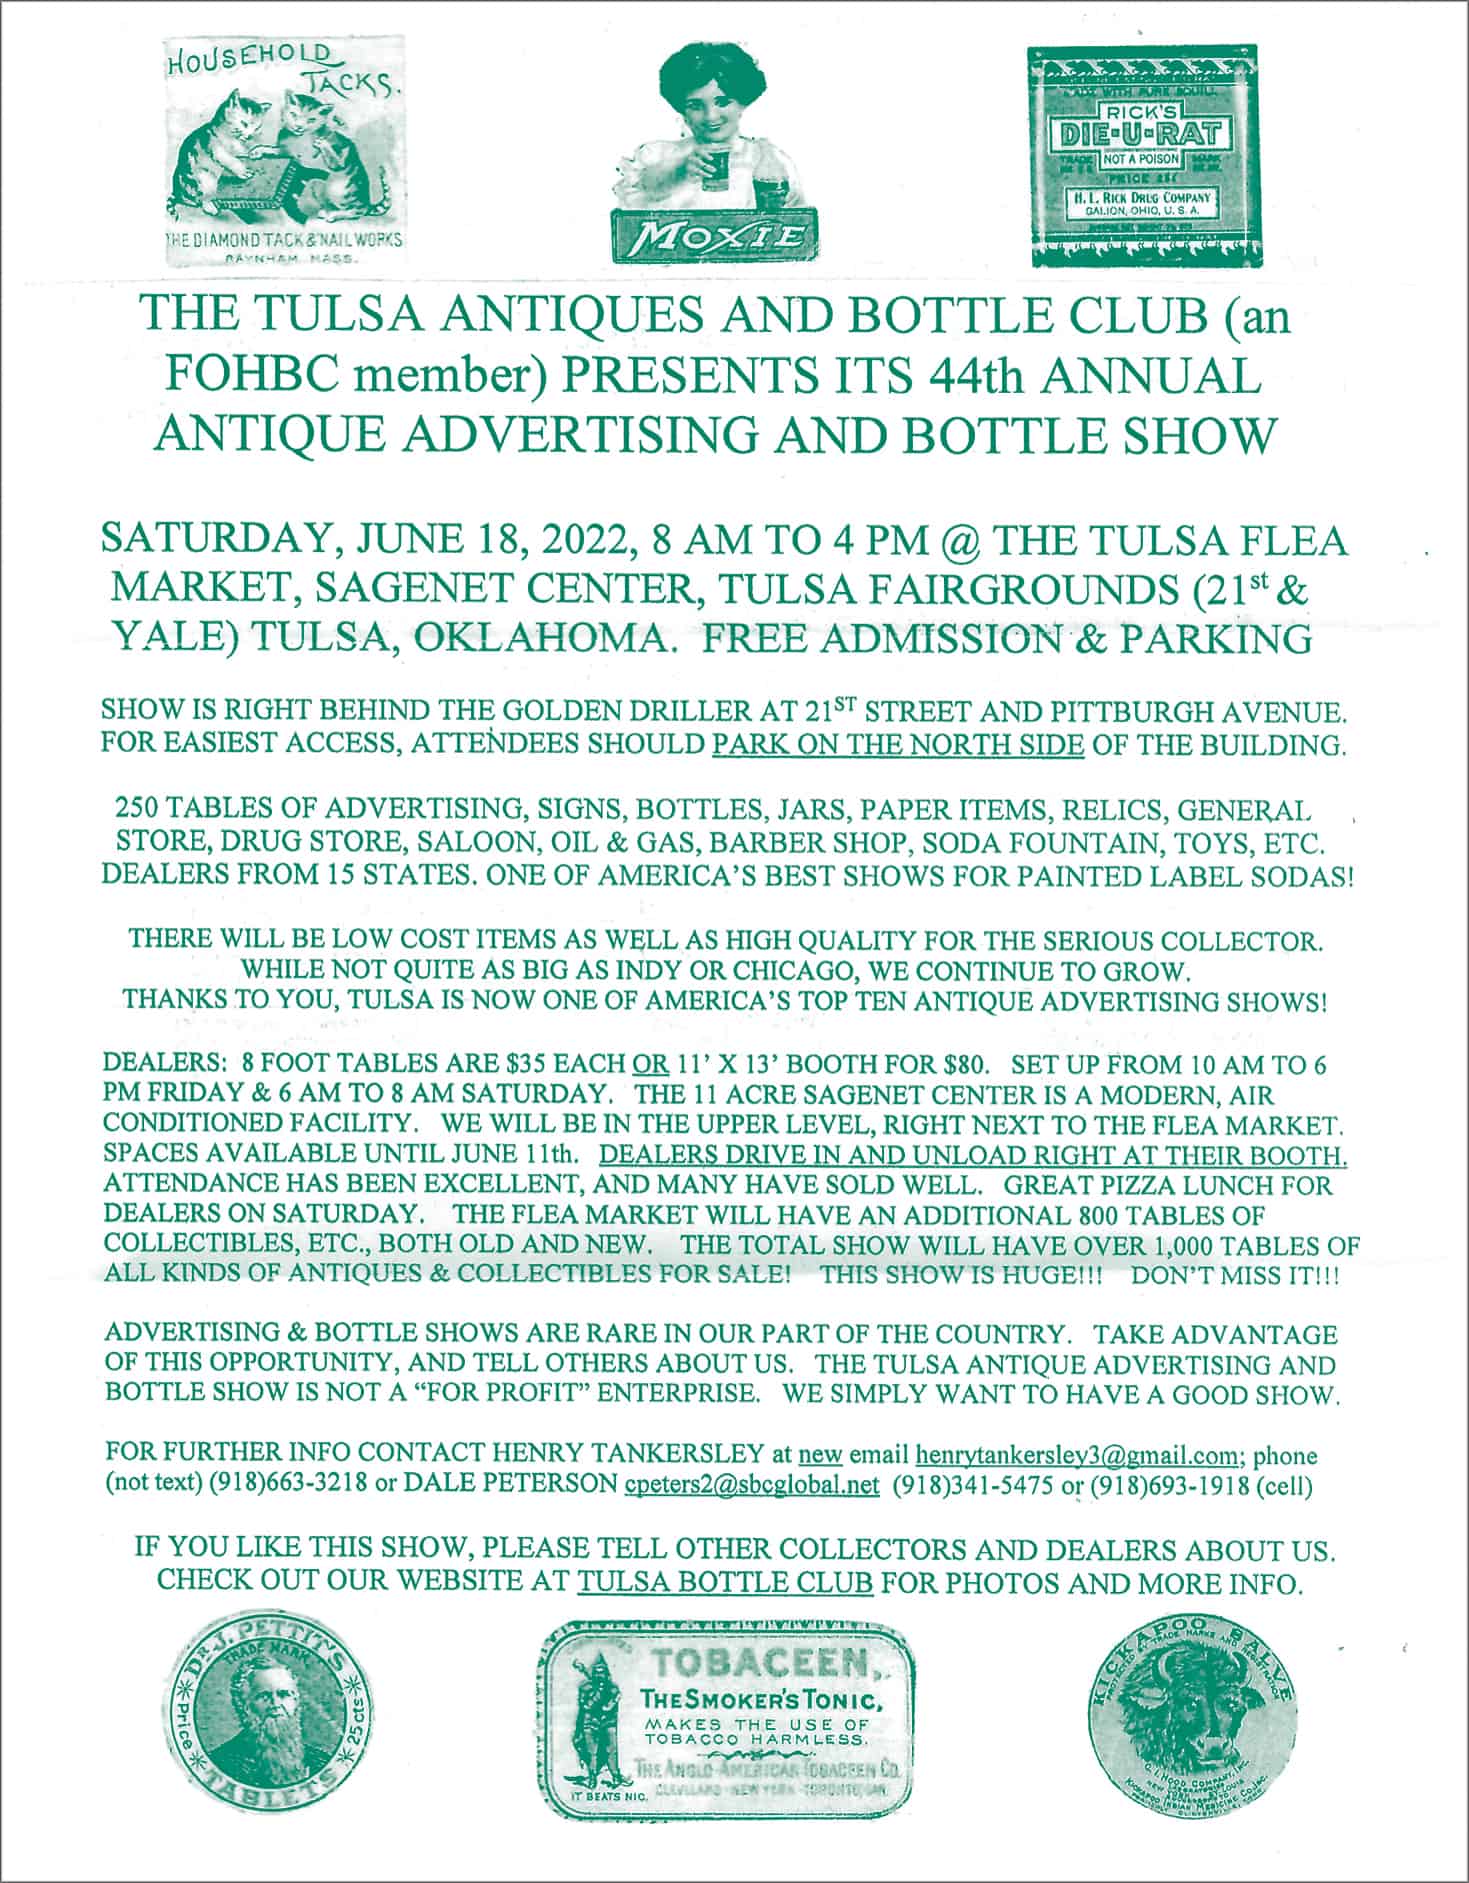 The Tulsa Antiques and Bottle Club’s 44th Annual Antique Advertising and Bottle Show @ SageNet Center at the Tulsa Fairgrounds